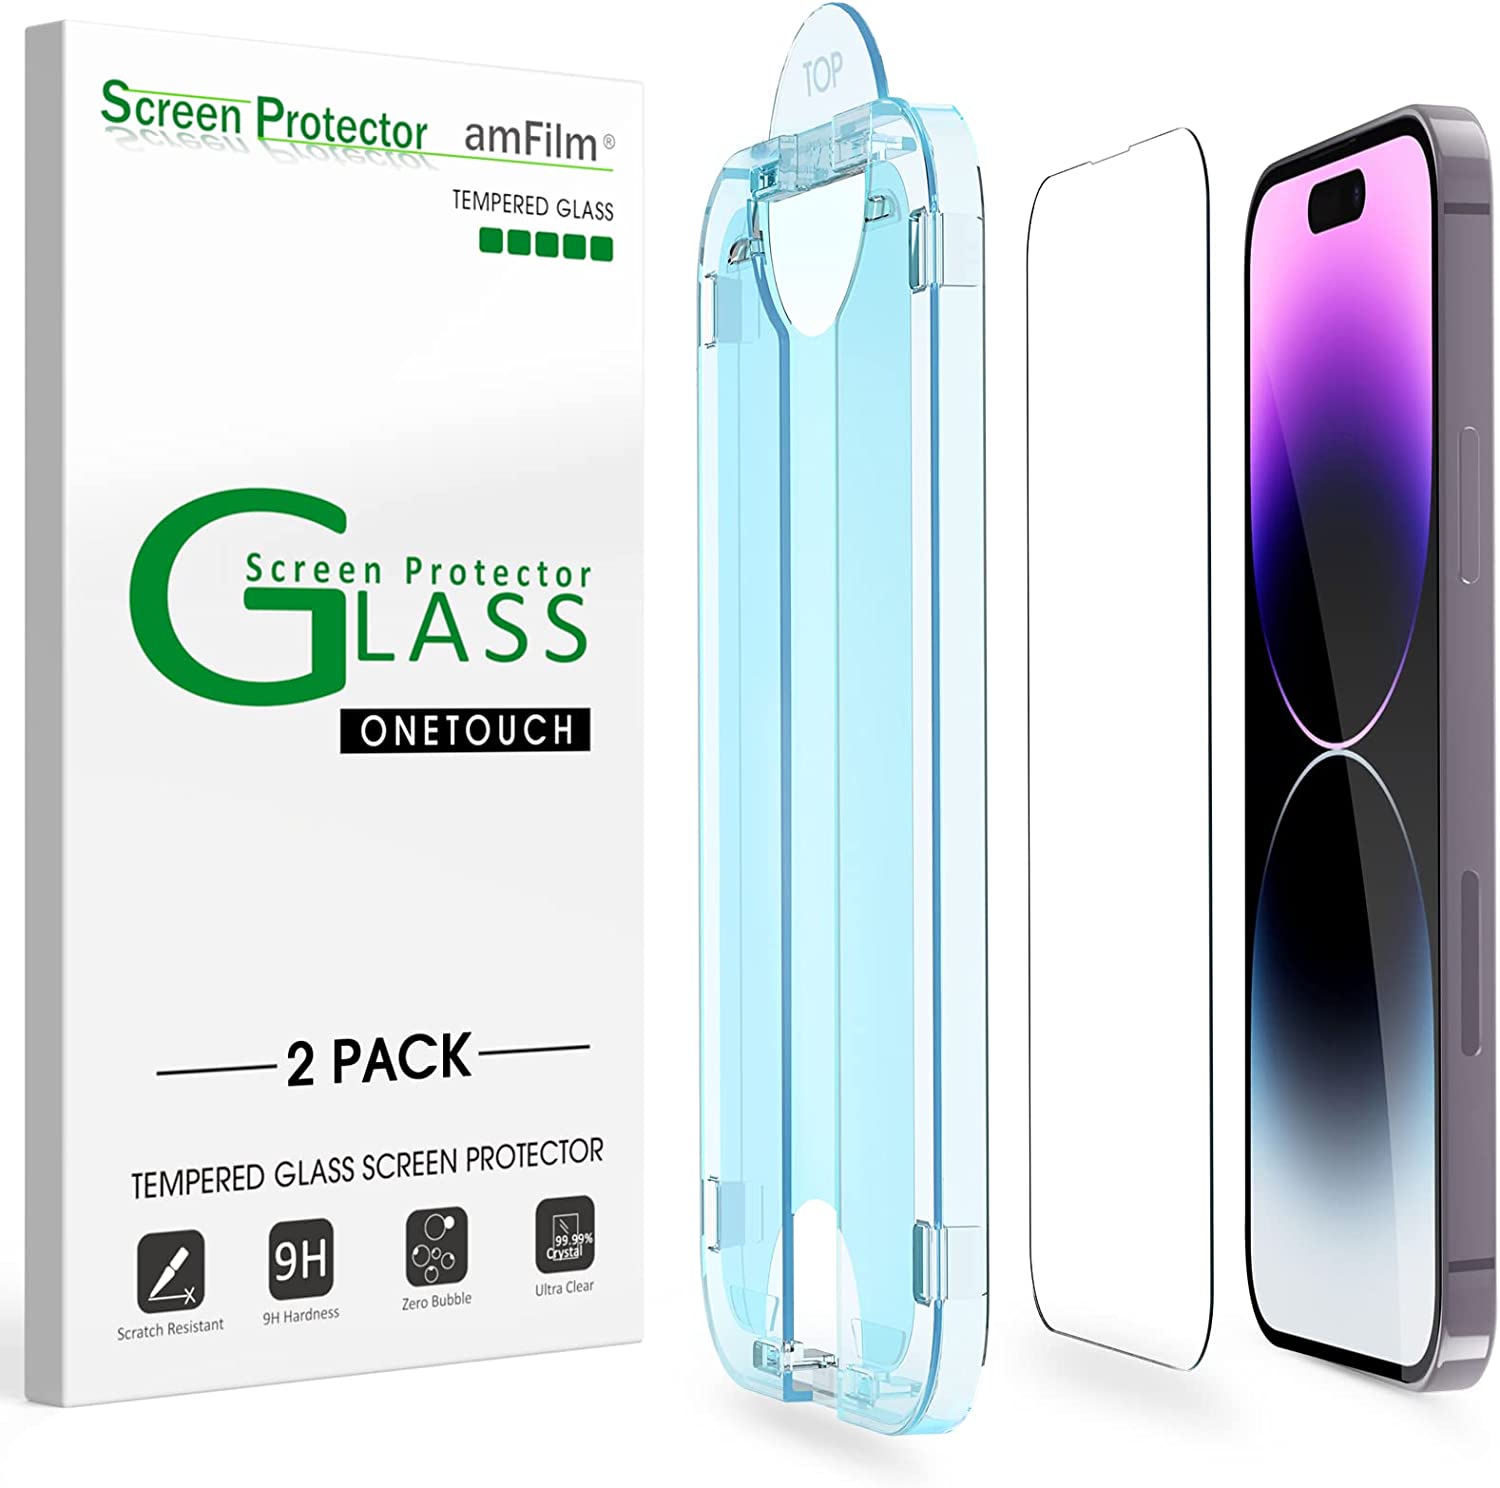 Shatterproof Scratch-Resistant Case Friendly Tempered Glass Film Screen Protector for iPhone 11 Pro Max 3 Pack Screen Protector for iPhone 11 Pro Max Conber 